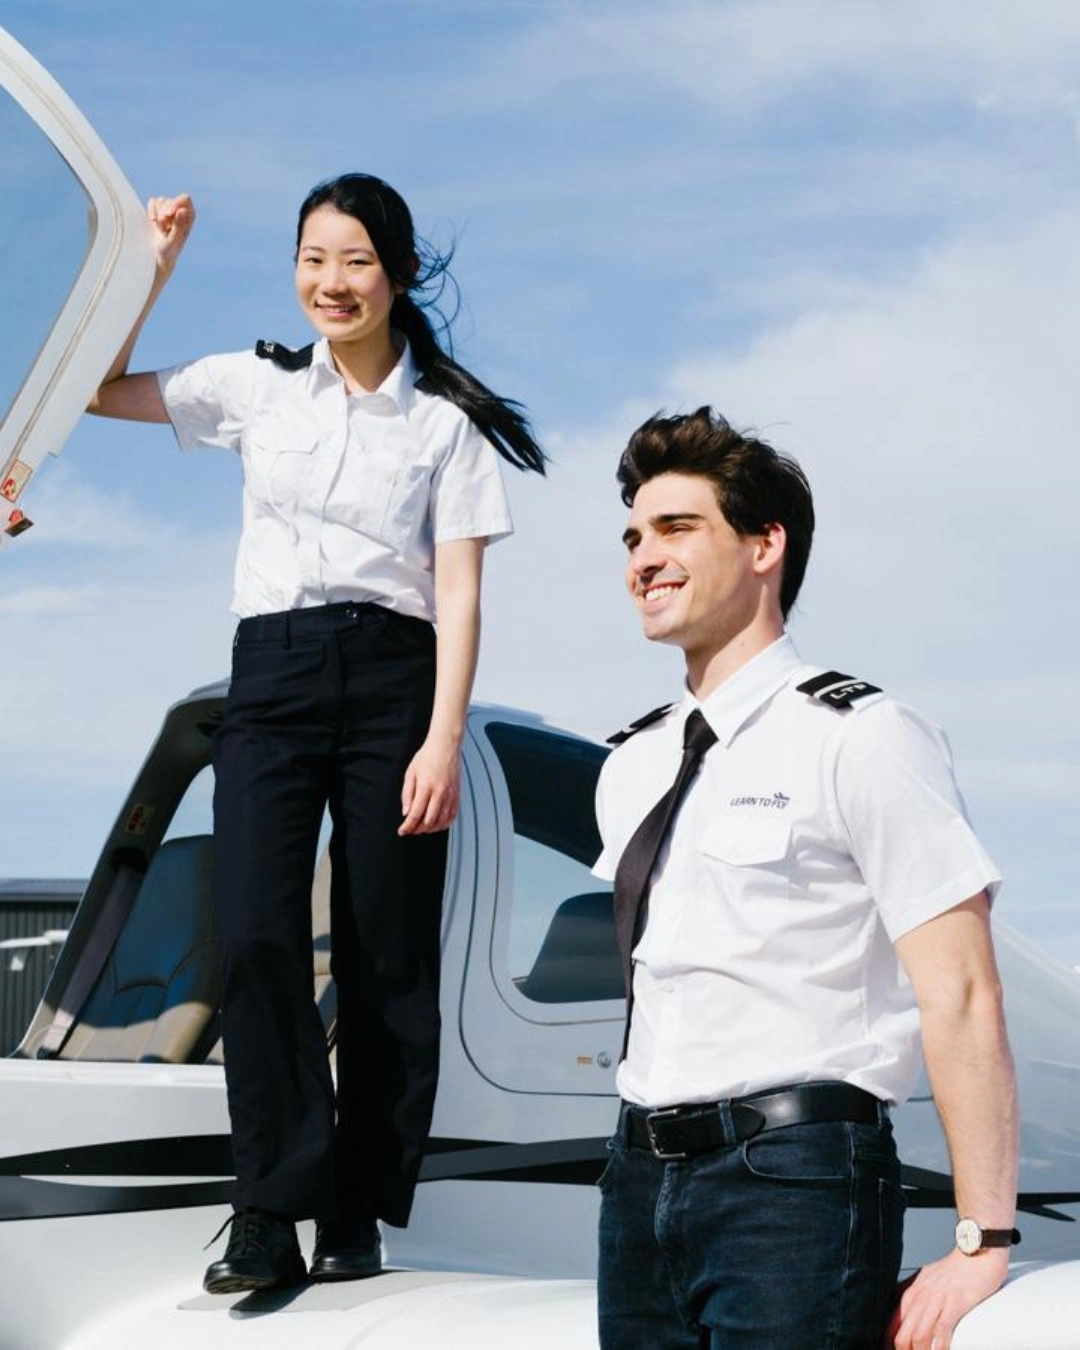 How to Finance Your Commercial Pilot Licence?